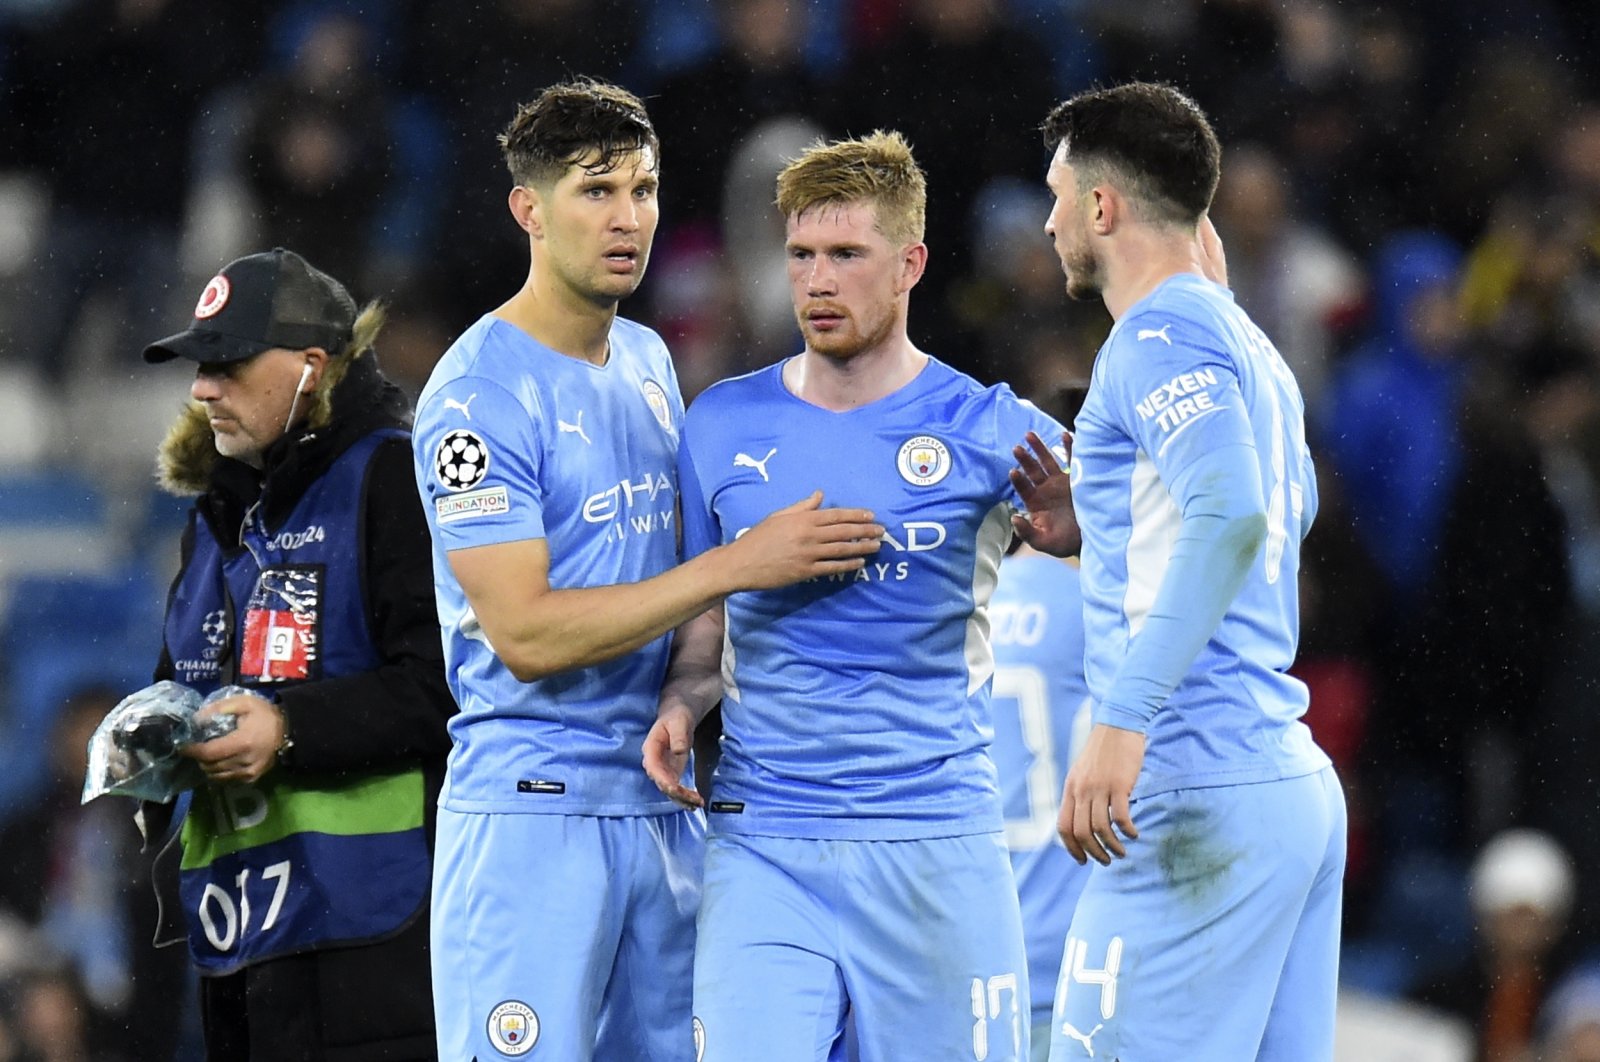 Kevin De Bruyne (C) of Manchester City celebrates with teammates after winning the UEFA Champions League quarterfinal, first leg match against Atletico Madrid, Manchester, England, April 5, 2022. (EPA Photo)